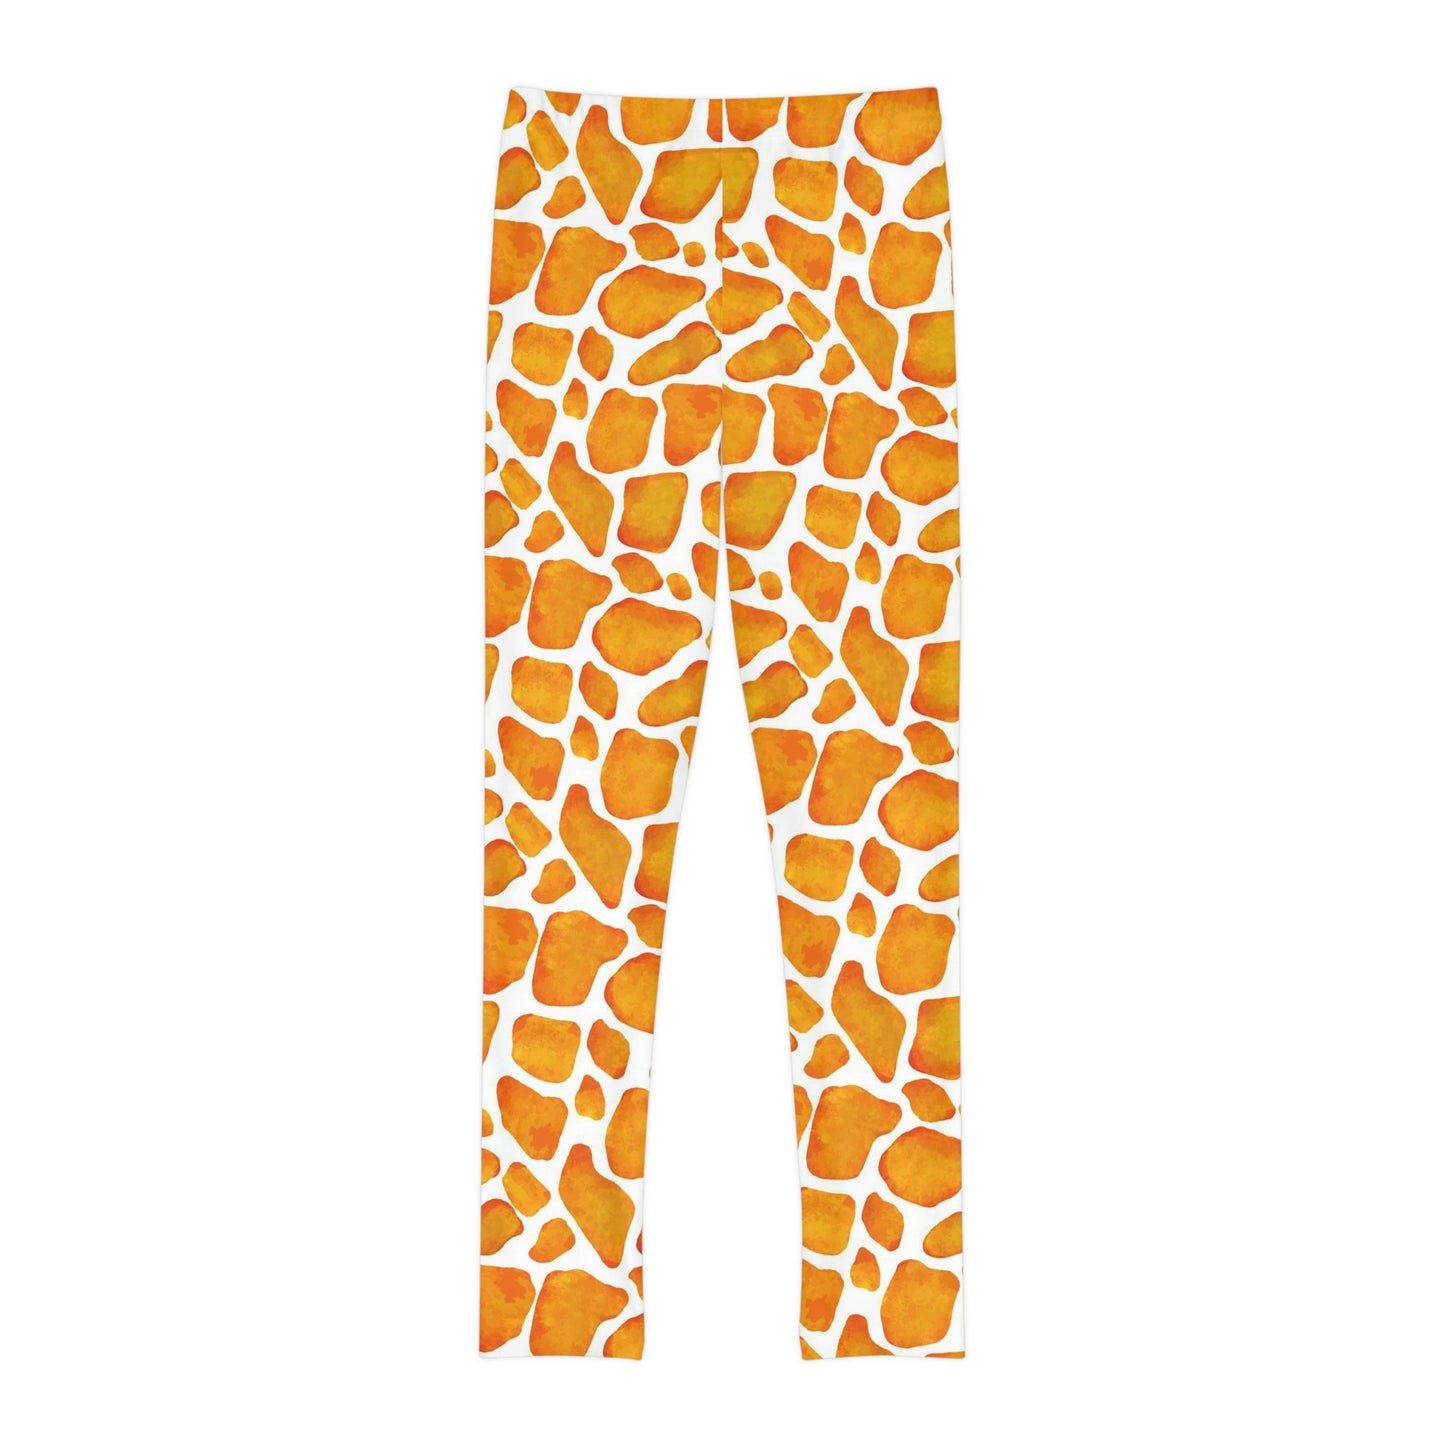 Giraffe animal kingdom, Safari Youth Leggings,  One of a Kind Gift - Unique Workout Activewear tights for kids, Daughter, Niece  Christmas Gift